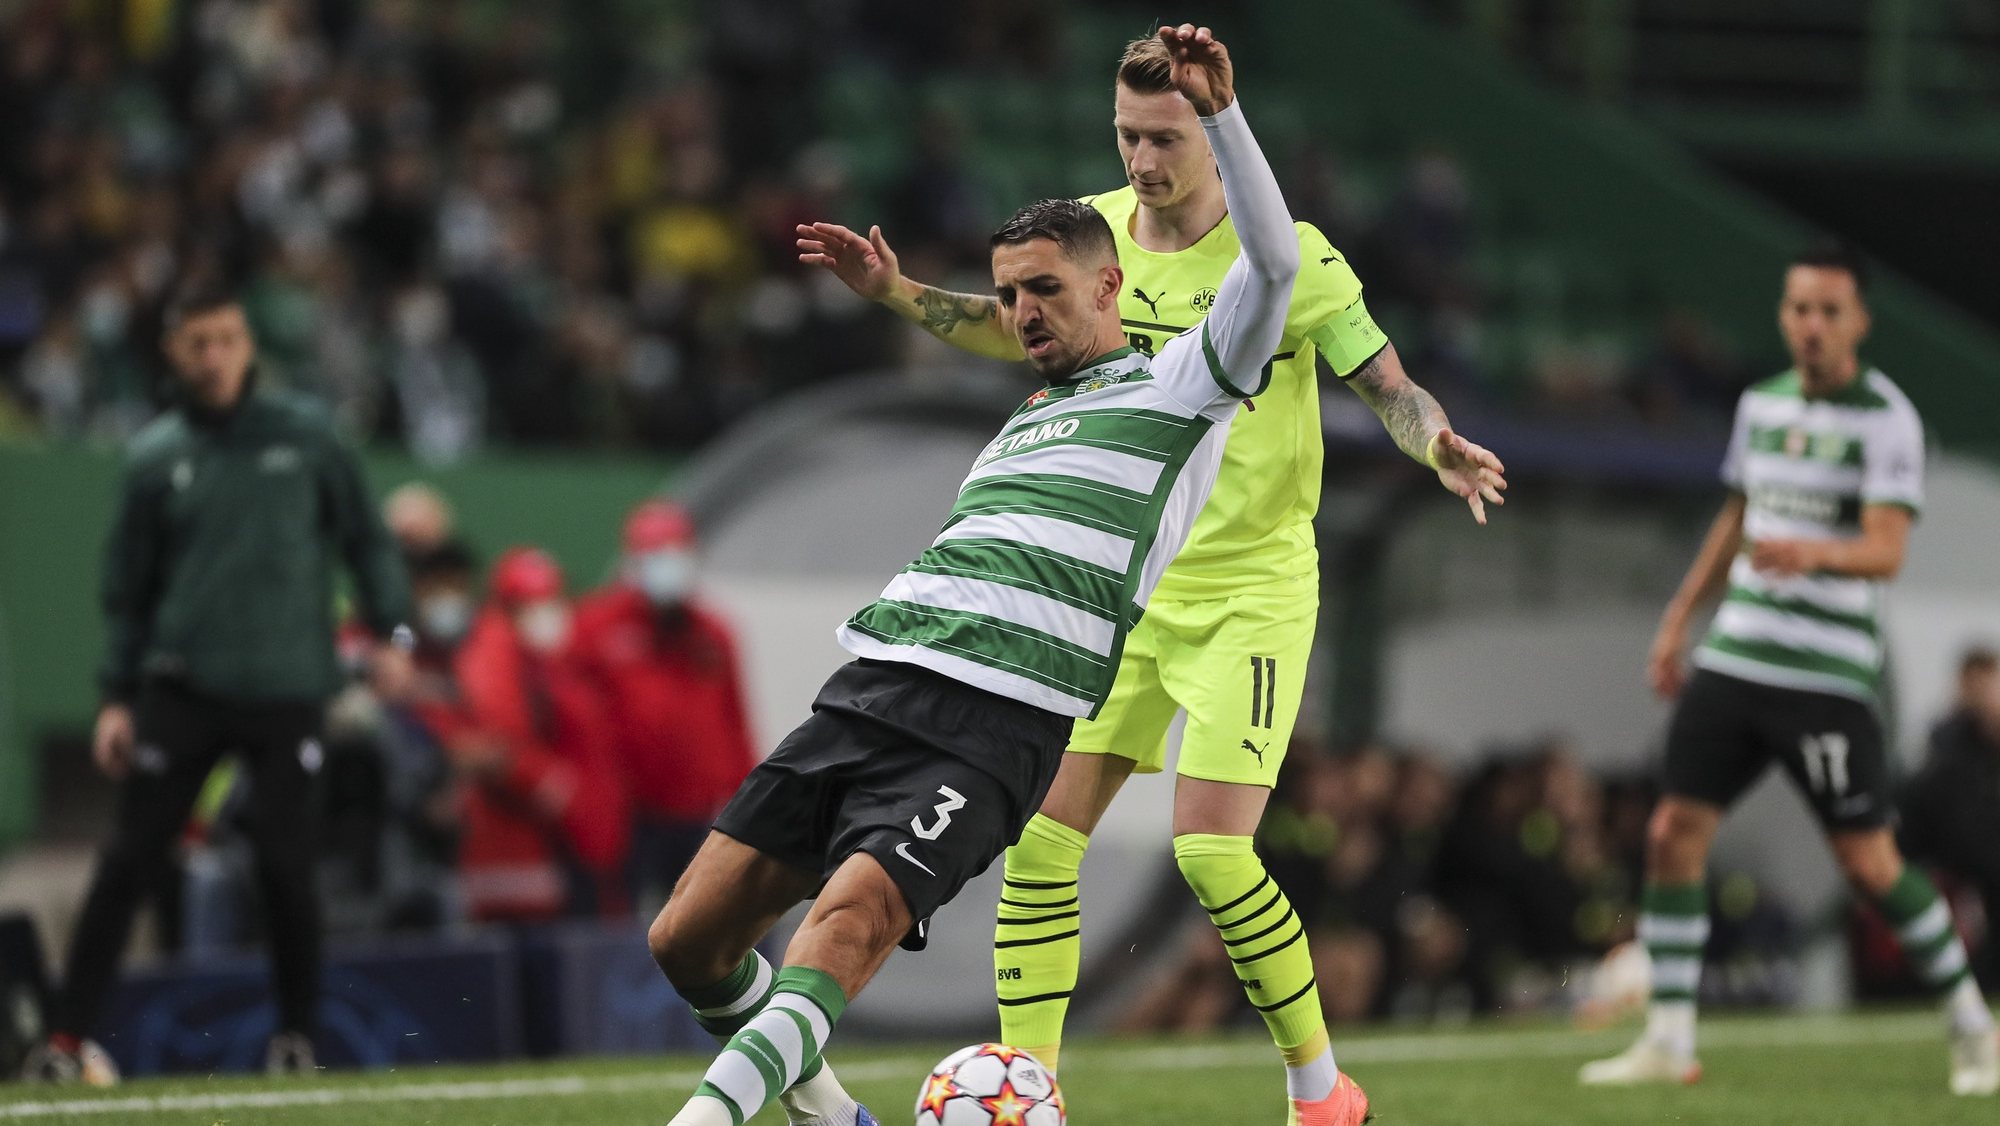 Sporting player Zouhair Feddal (L) fights for the ball with Borrusia Dortmund player Marco Reus (R) during the UEFA Champions League Group C soccer match at Alvalade Stadium in Lisbon, Portugal, 24 November 2021. MIGUEL A. LOPES/LUSA